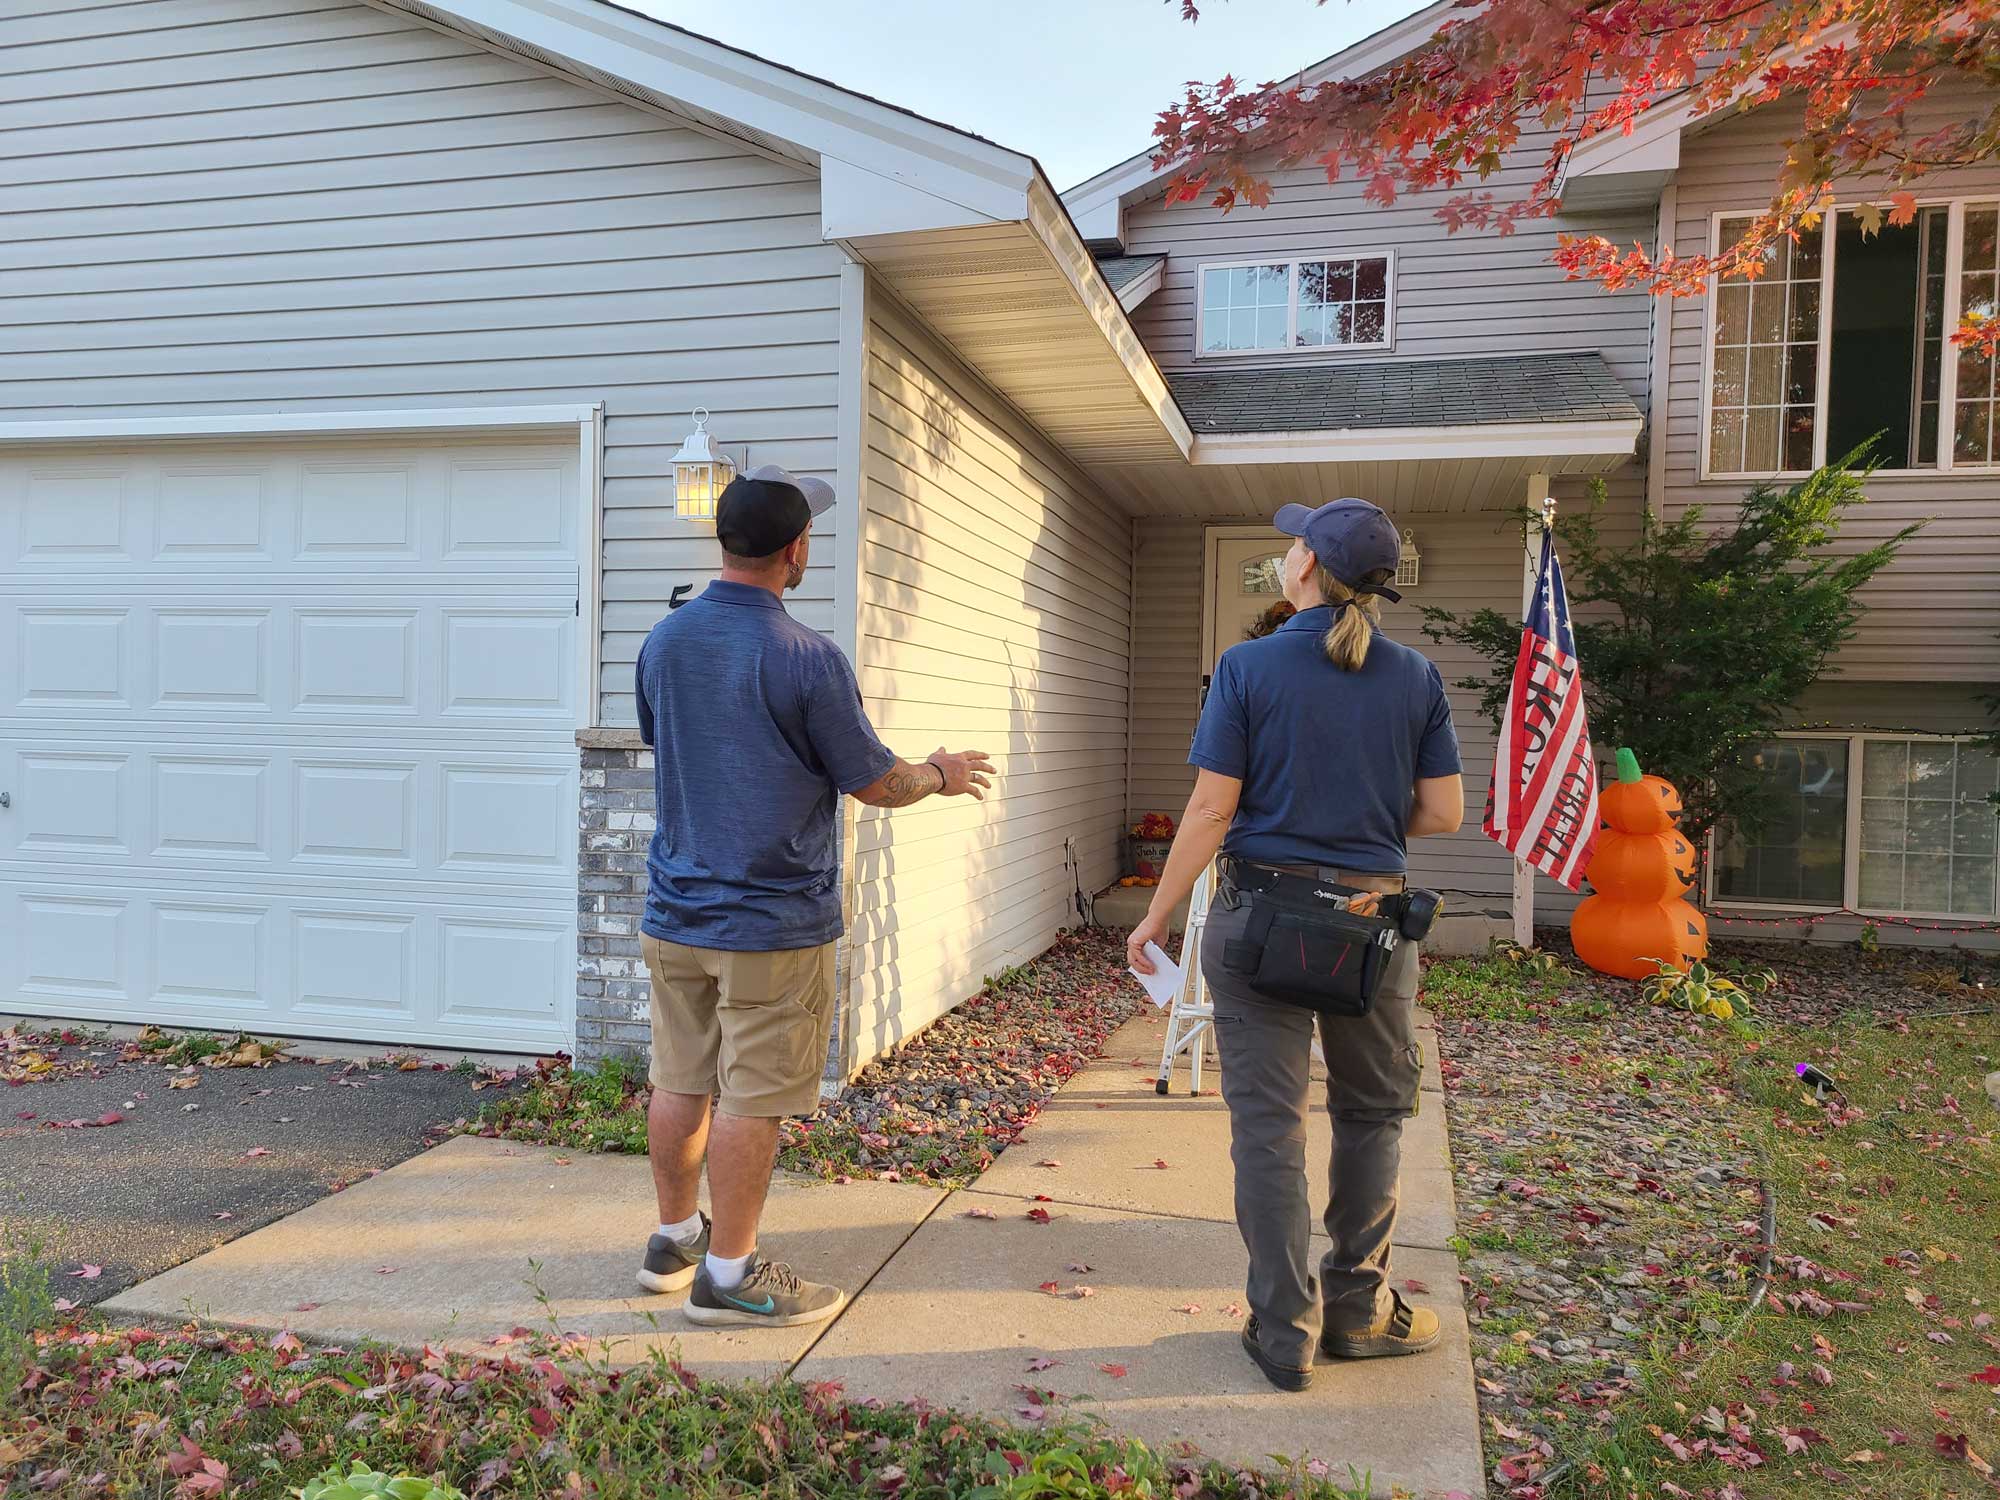 Siding Inspection Team assessing the clients property